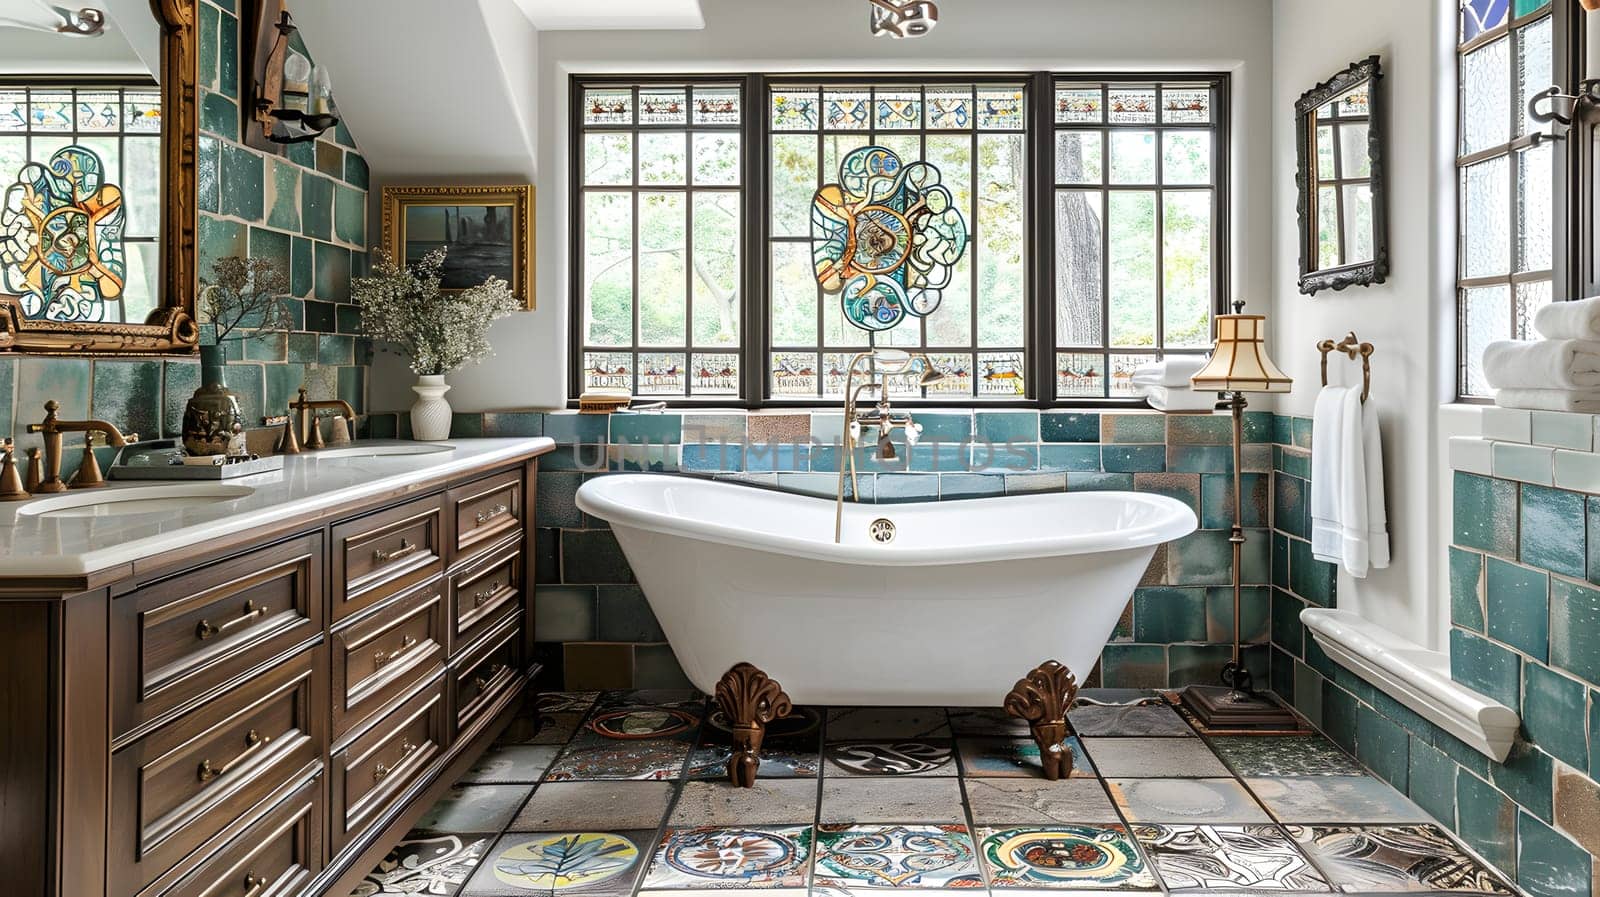 A bathroom with a bathtub, sink, mirror, and stained glass windows. The interior design features composite materials in a rectangularshaped building